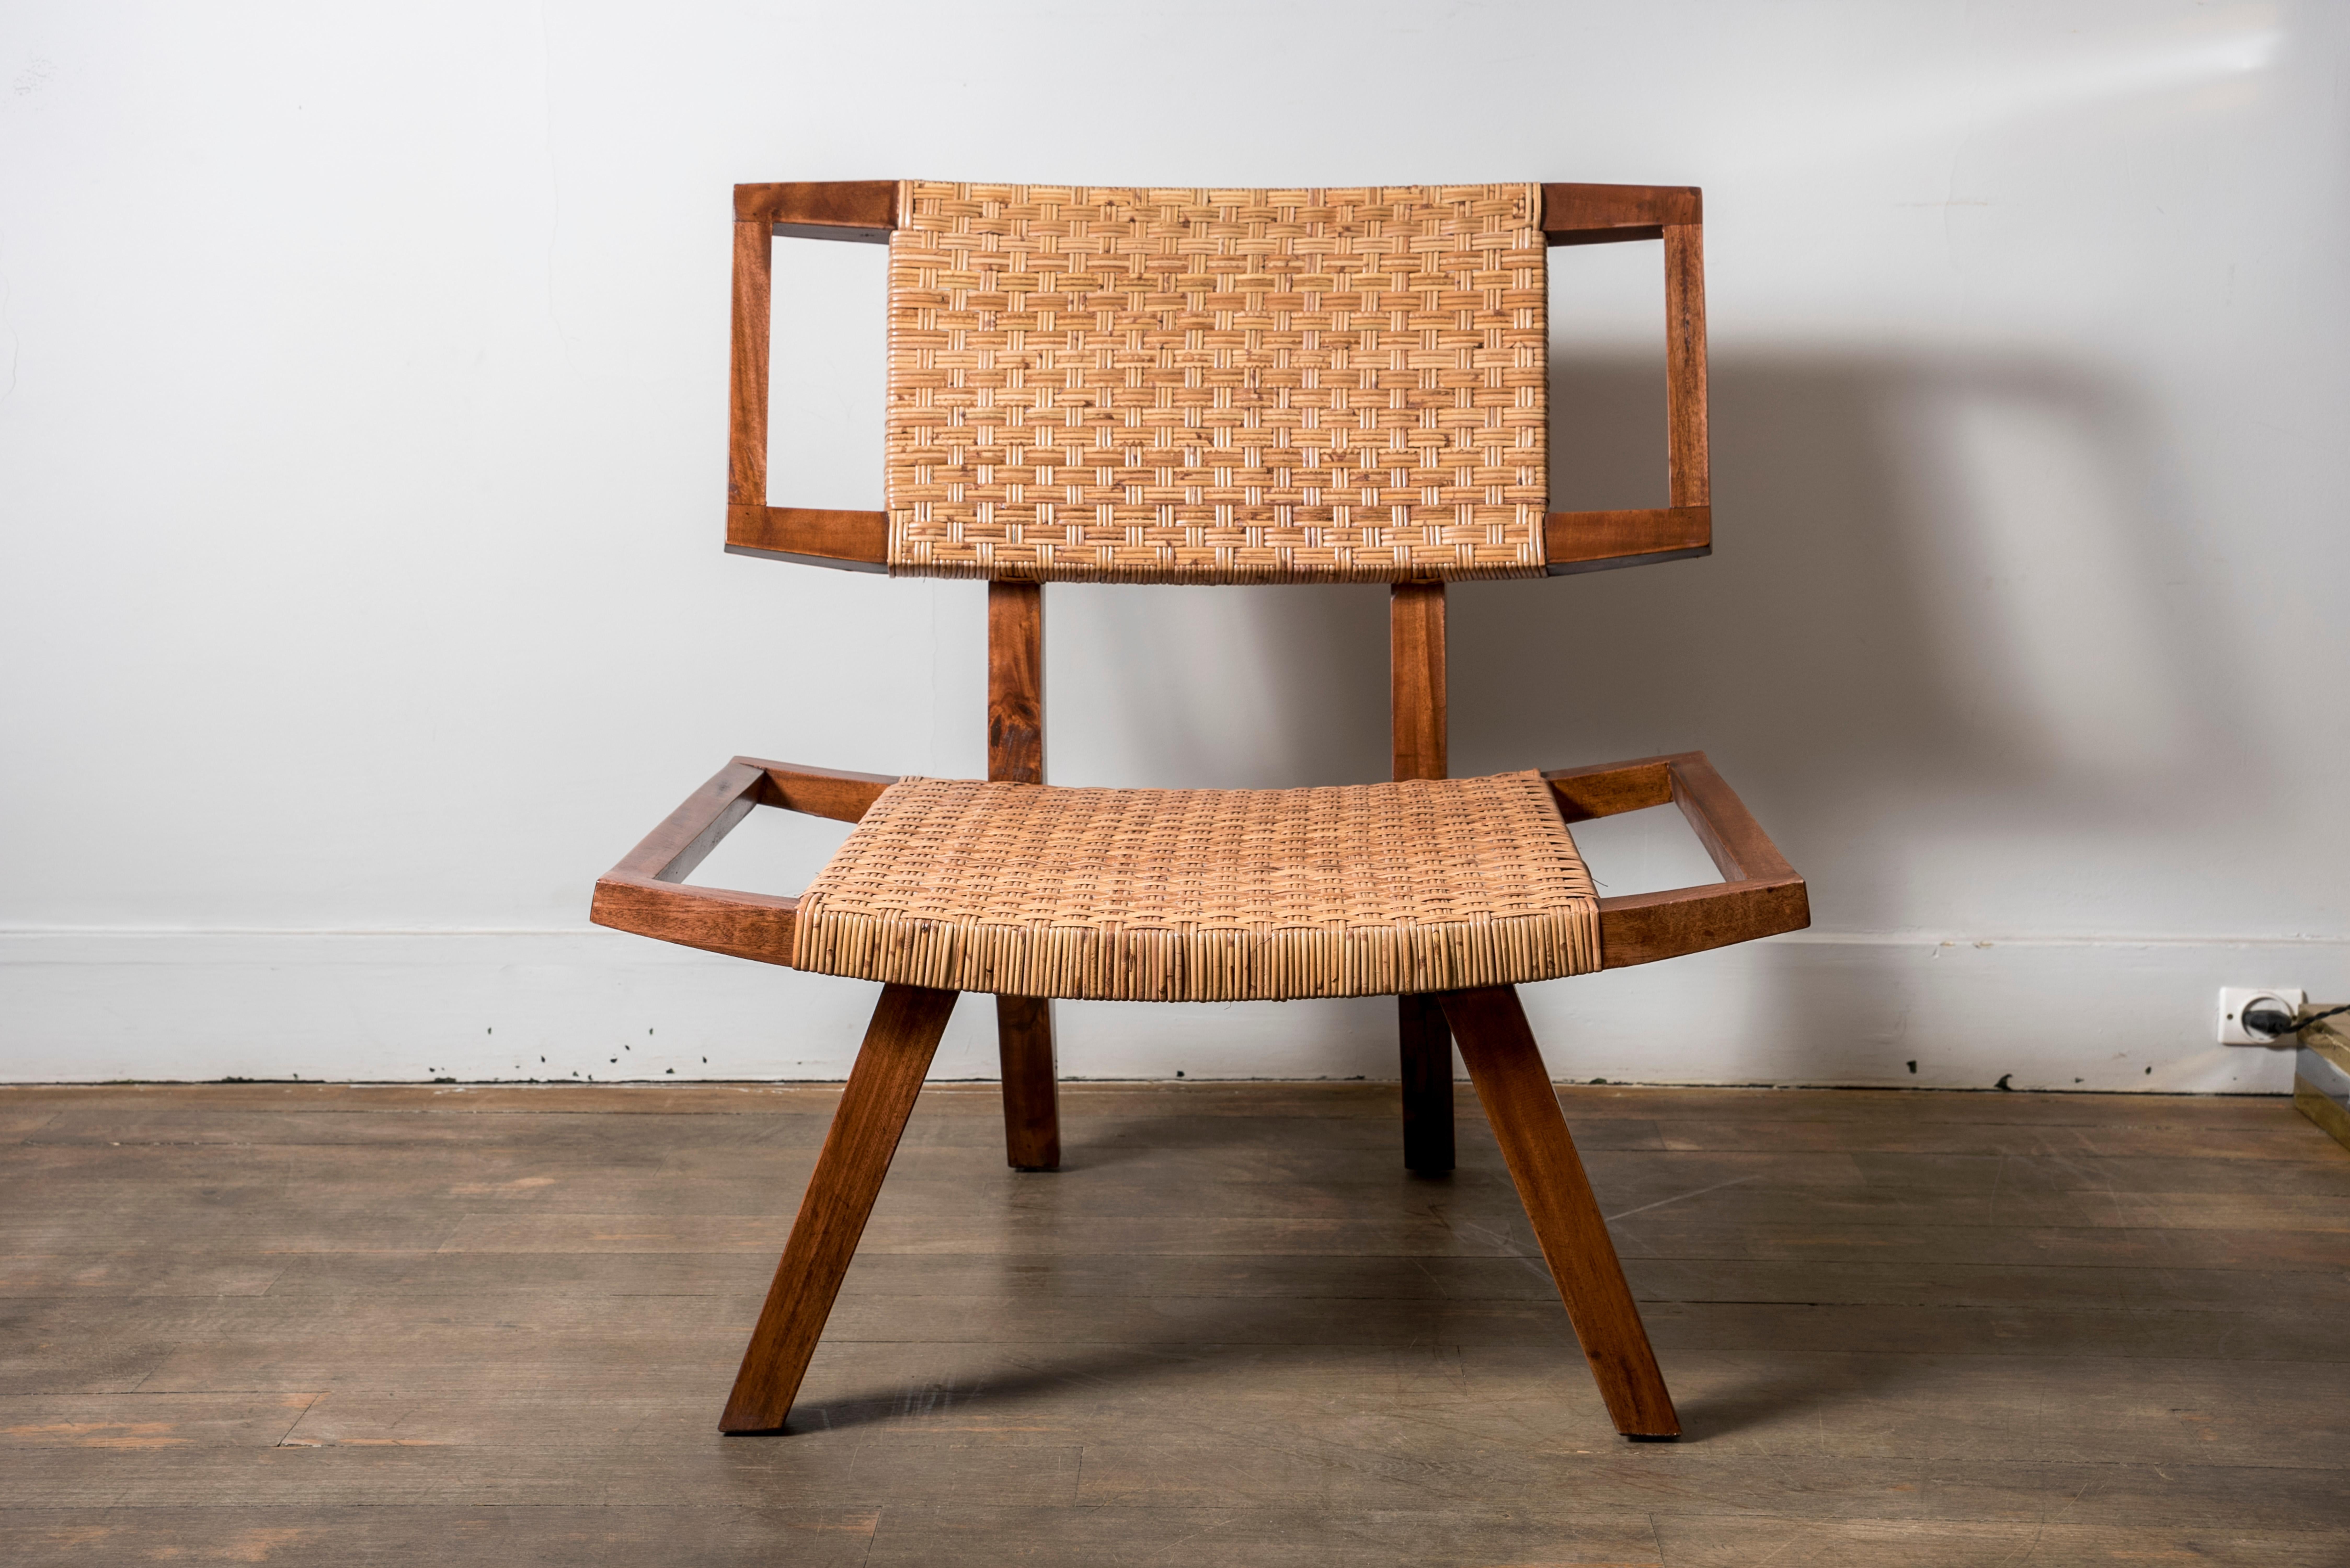 Pair of slipper chairs, original woven rattan (seat and back) and wood.
In the style of Paul Laszlo, a variation of the chair designed by Paul Laszlo and produced by Glenn of California, during the fifties.
USA, 1960s-1970s.